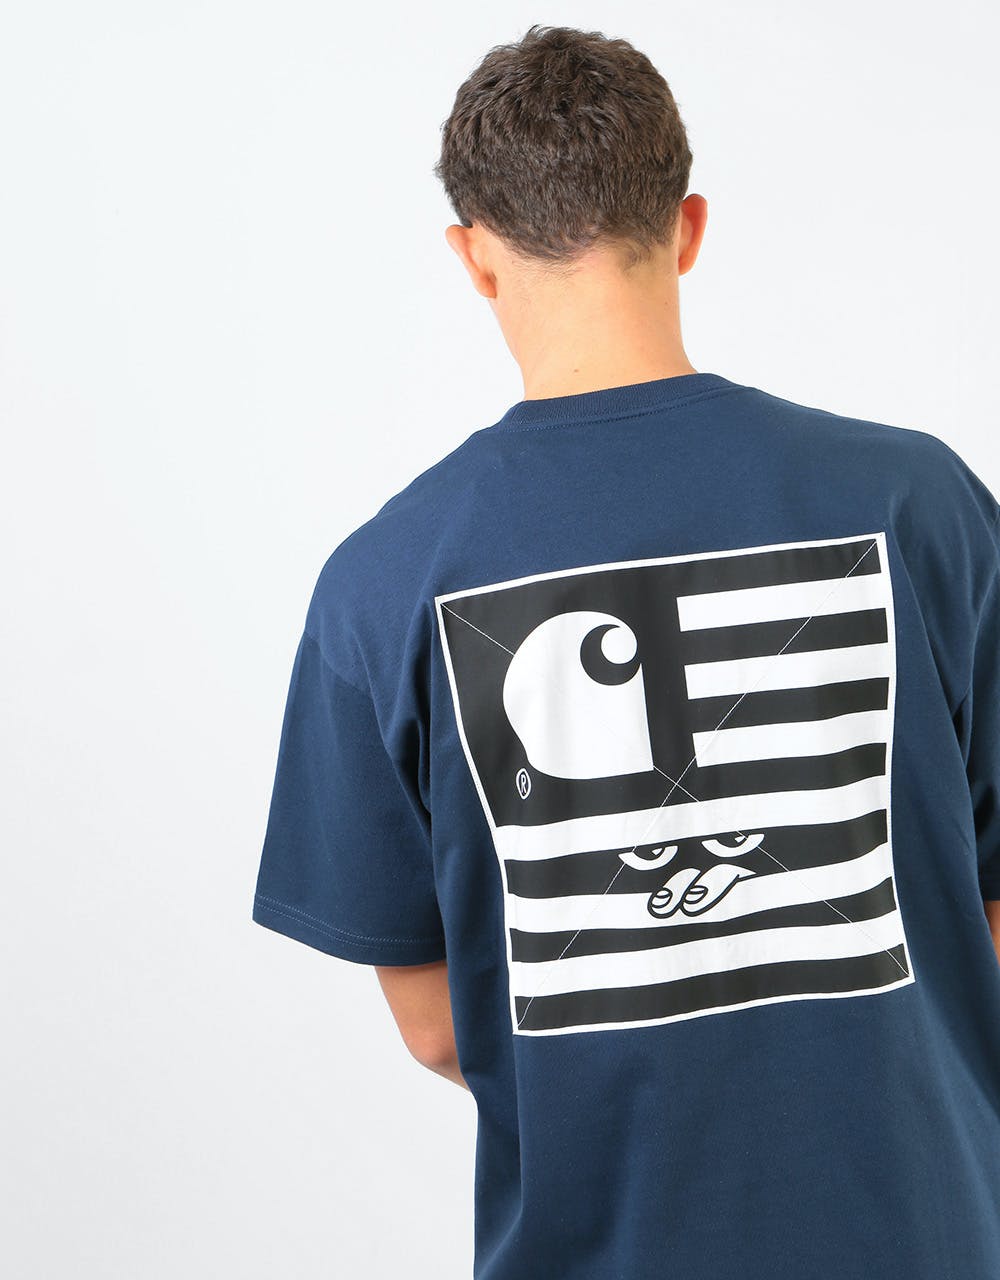 Carhartt WIP S/S Incognito T-Shirt - Blue